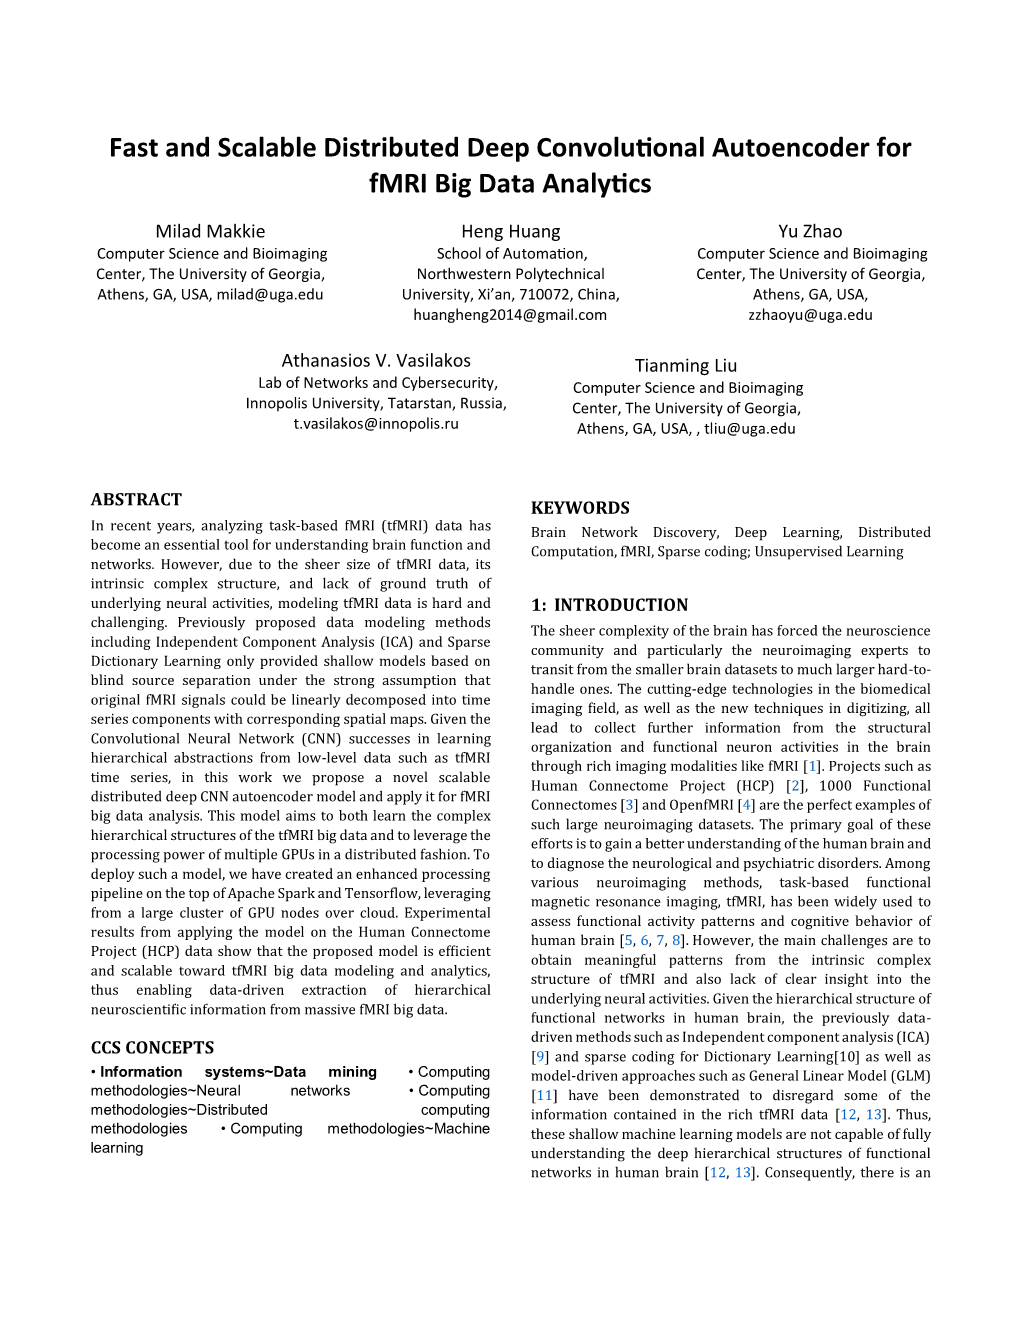 Fast and Scalable Distributed Deep Convolutional Autoencoder for Fmri Big Data Analytics